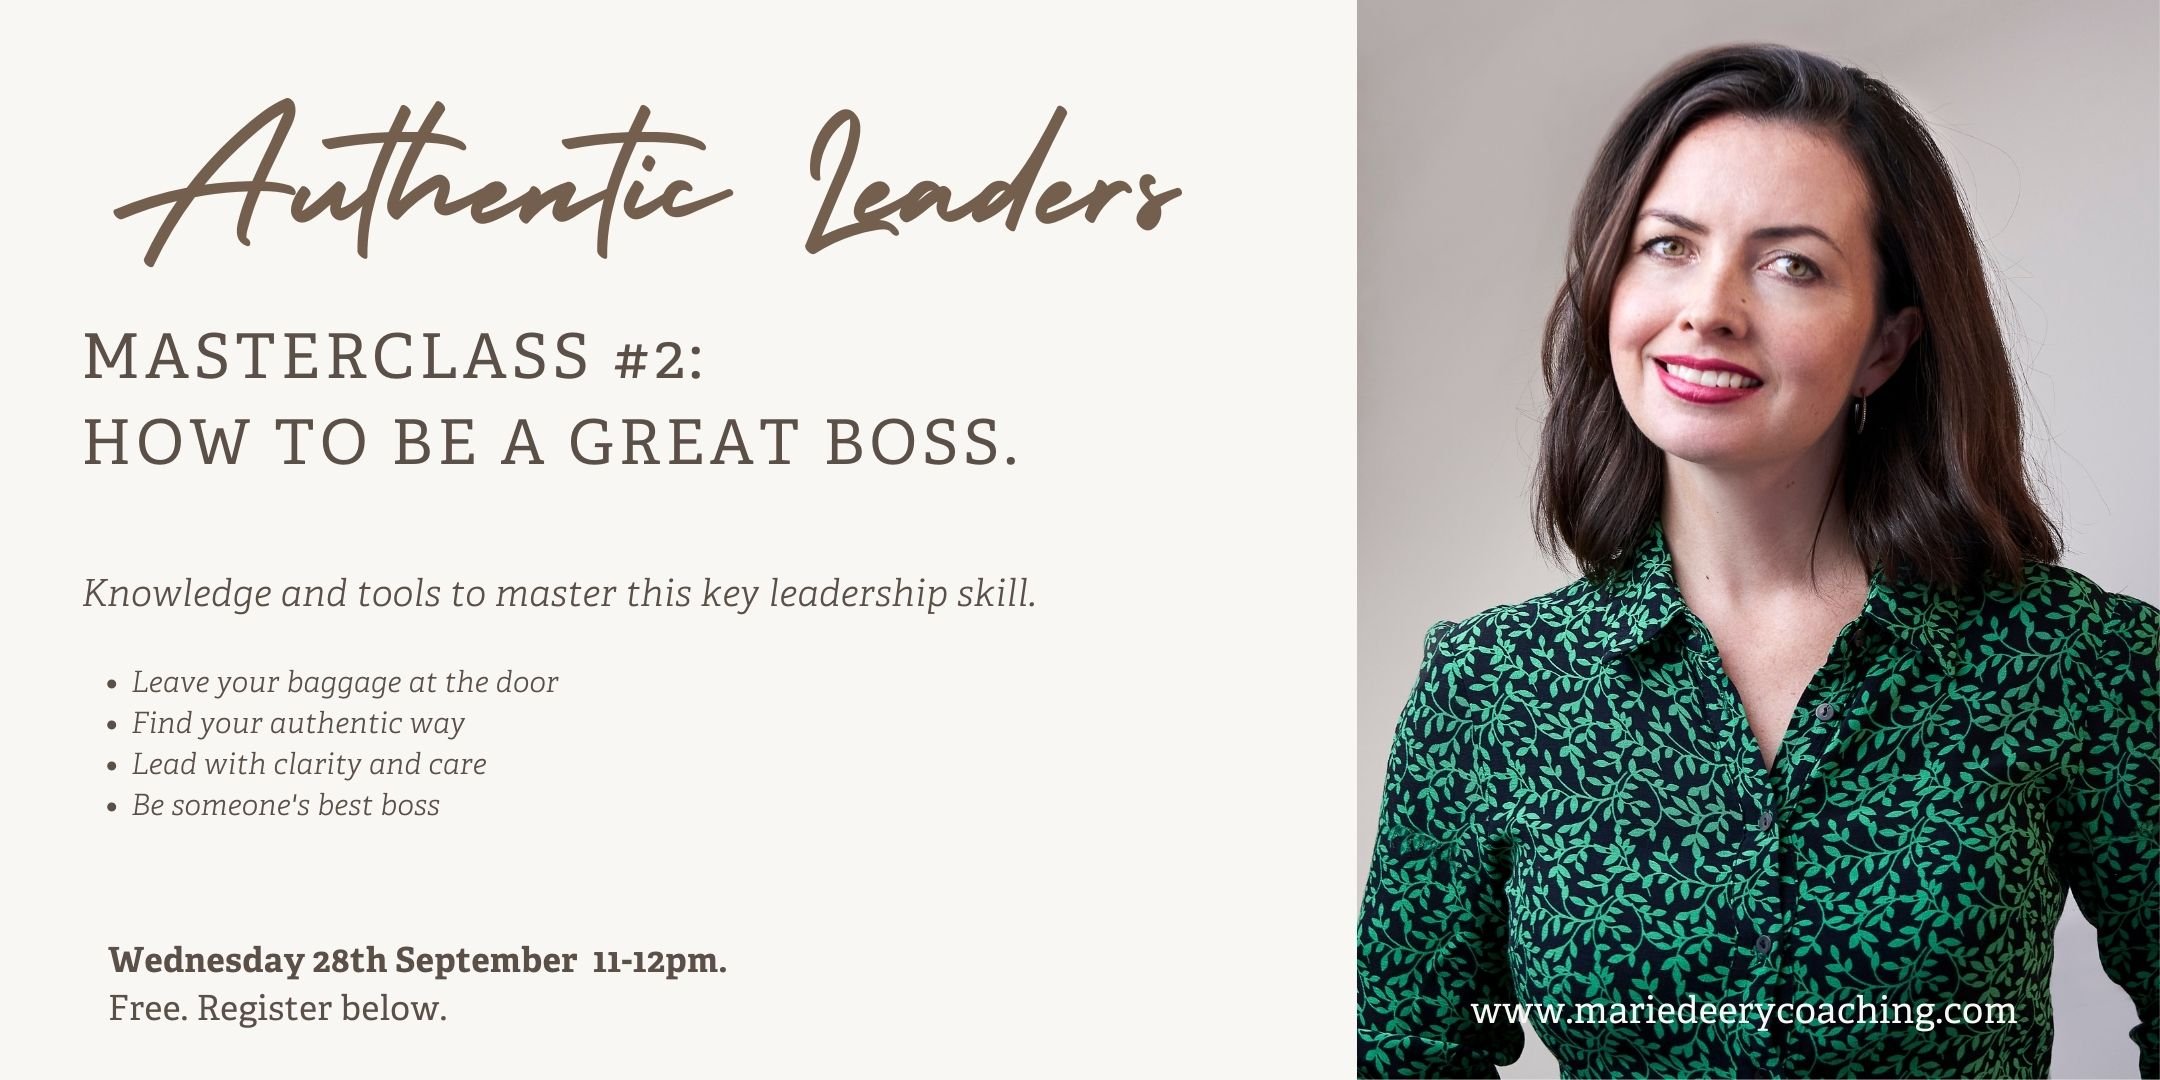 Authentic Leaders: HOW TO BE A GREAT BOSS